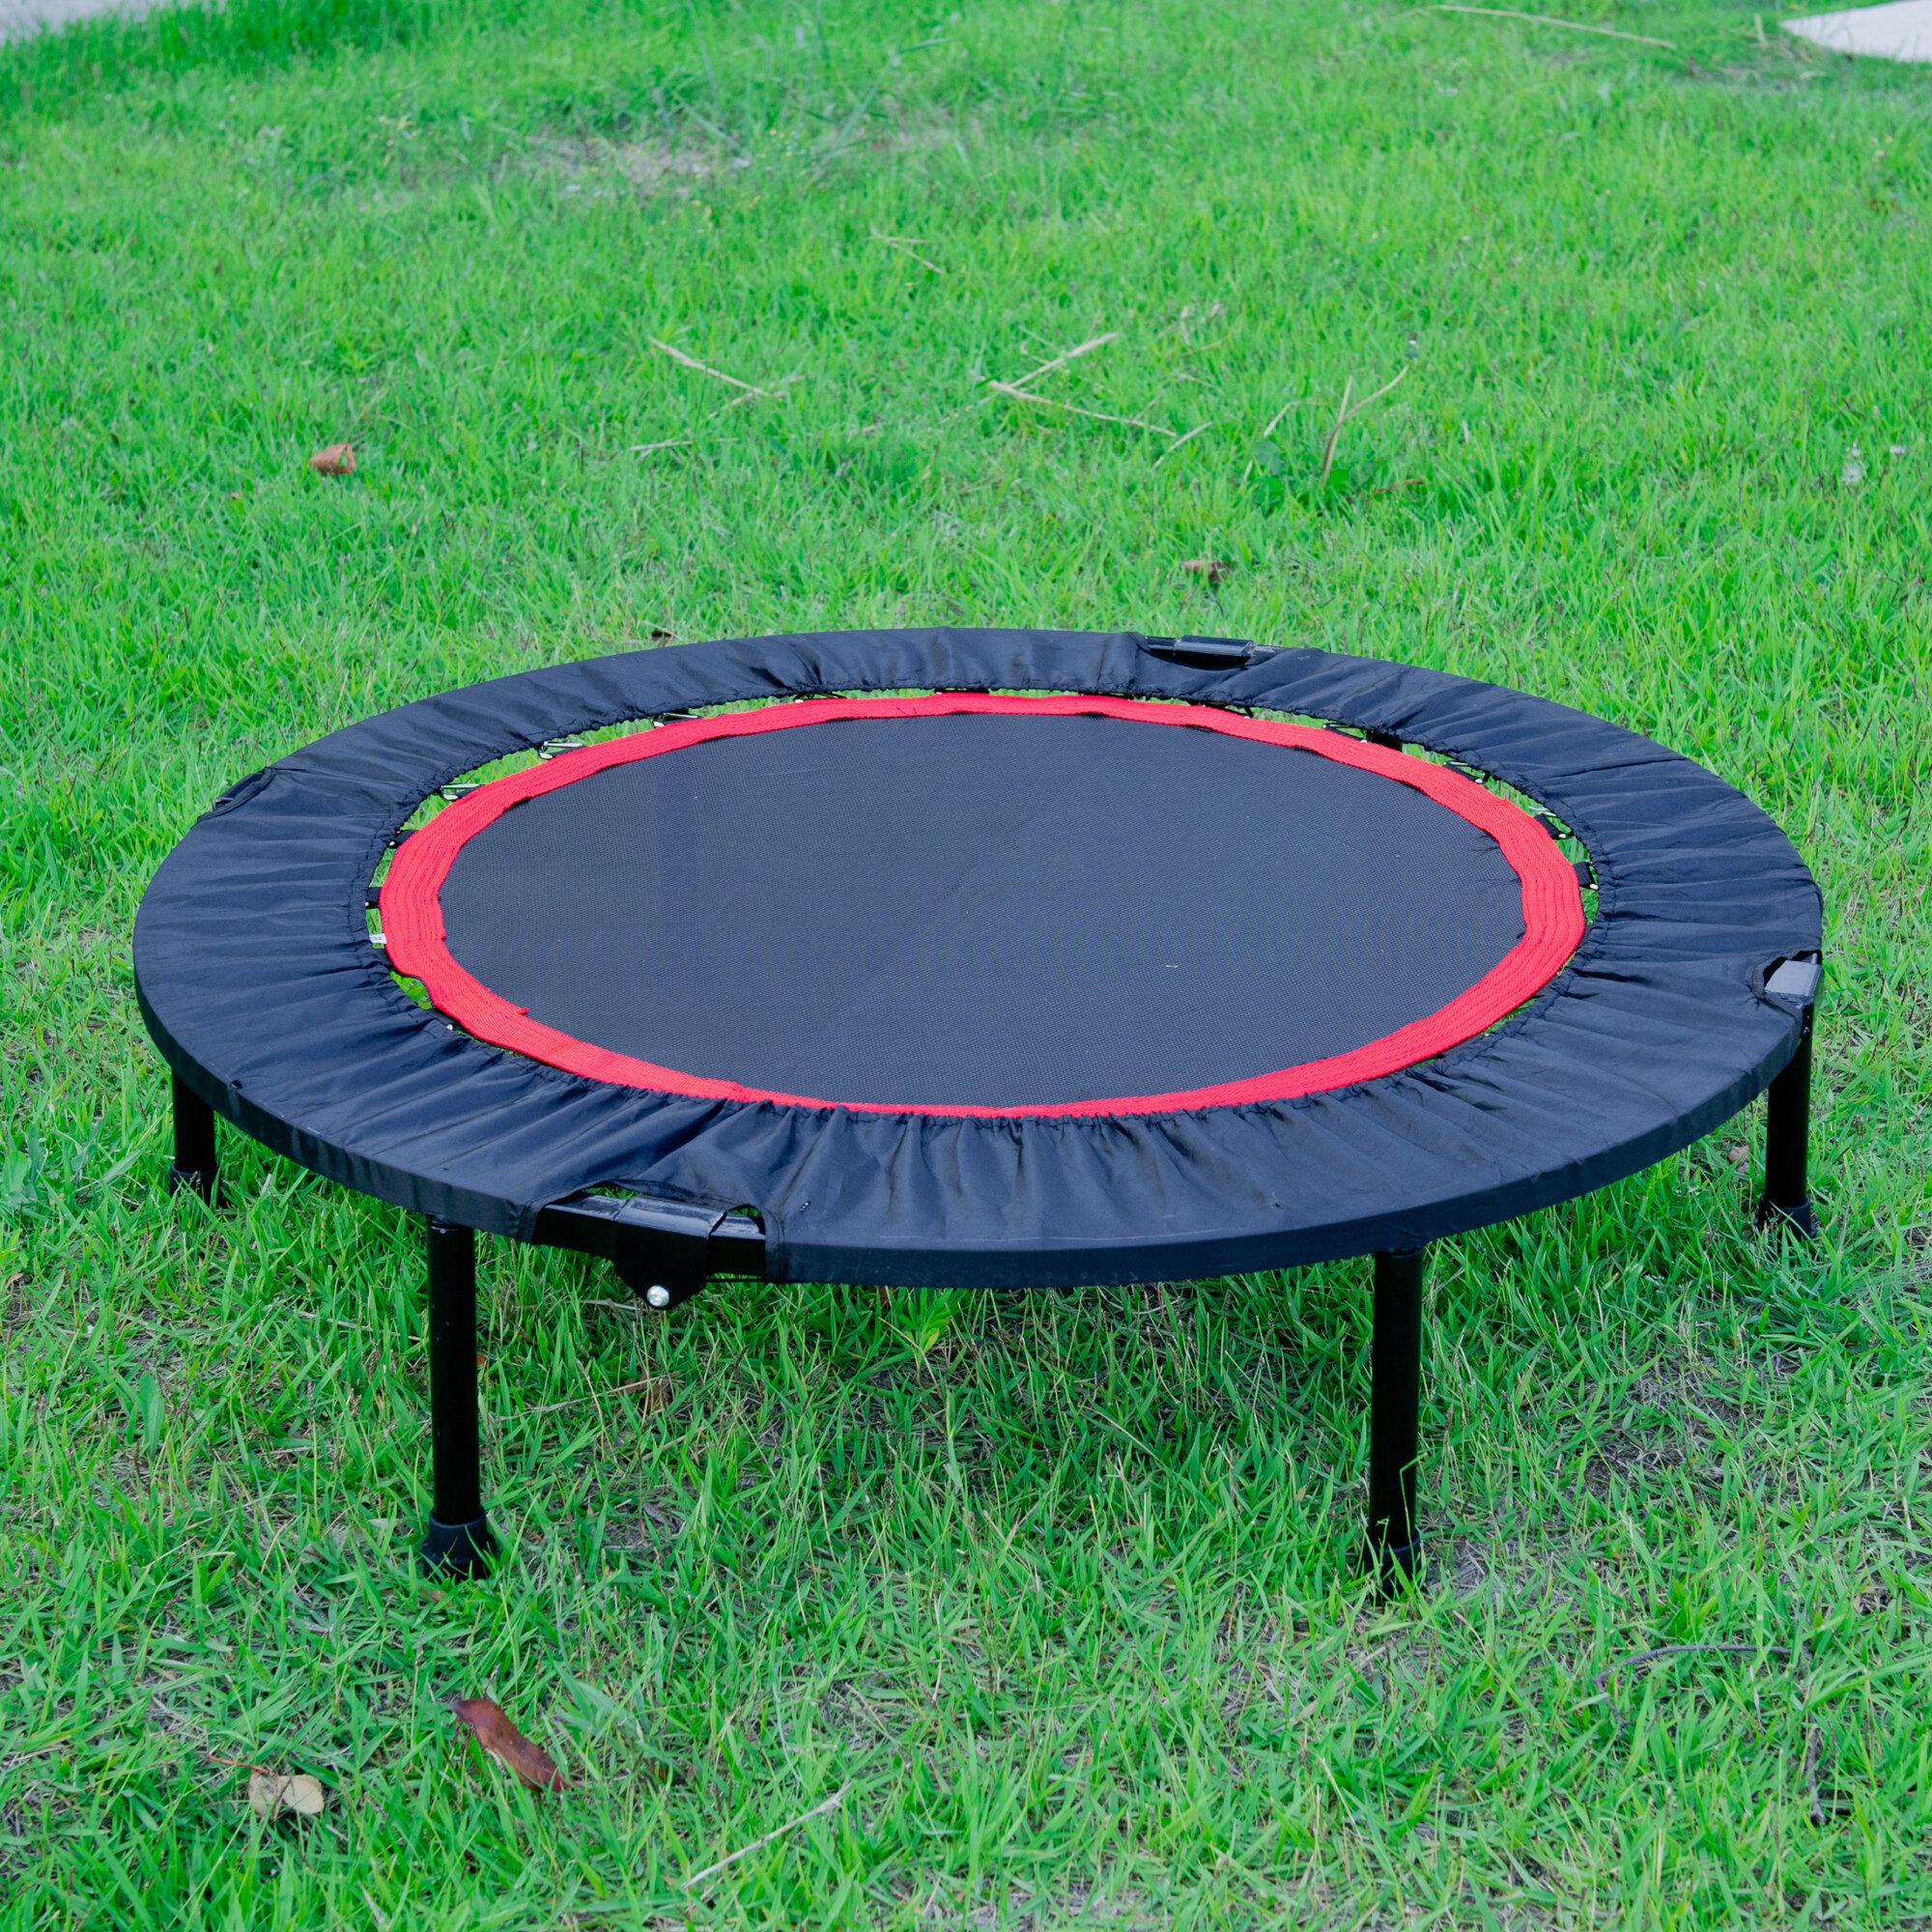 Fitness Trampoline for Adults, Indoor Rebounder Exercise